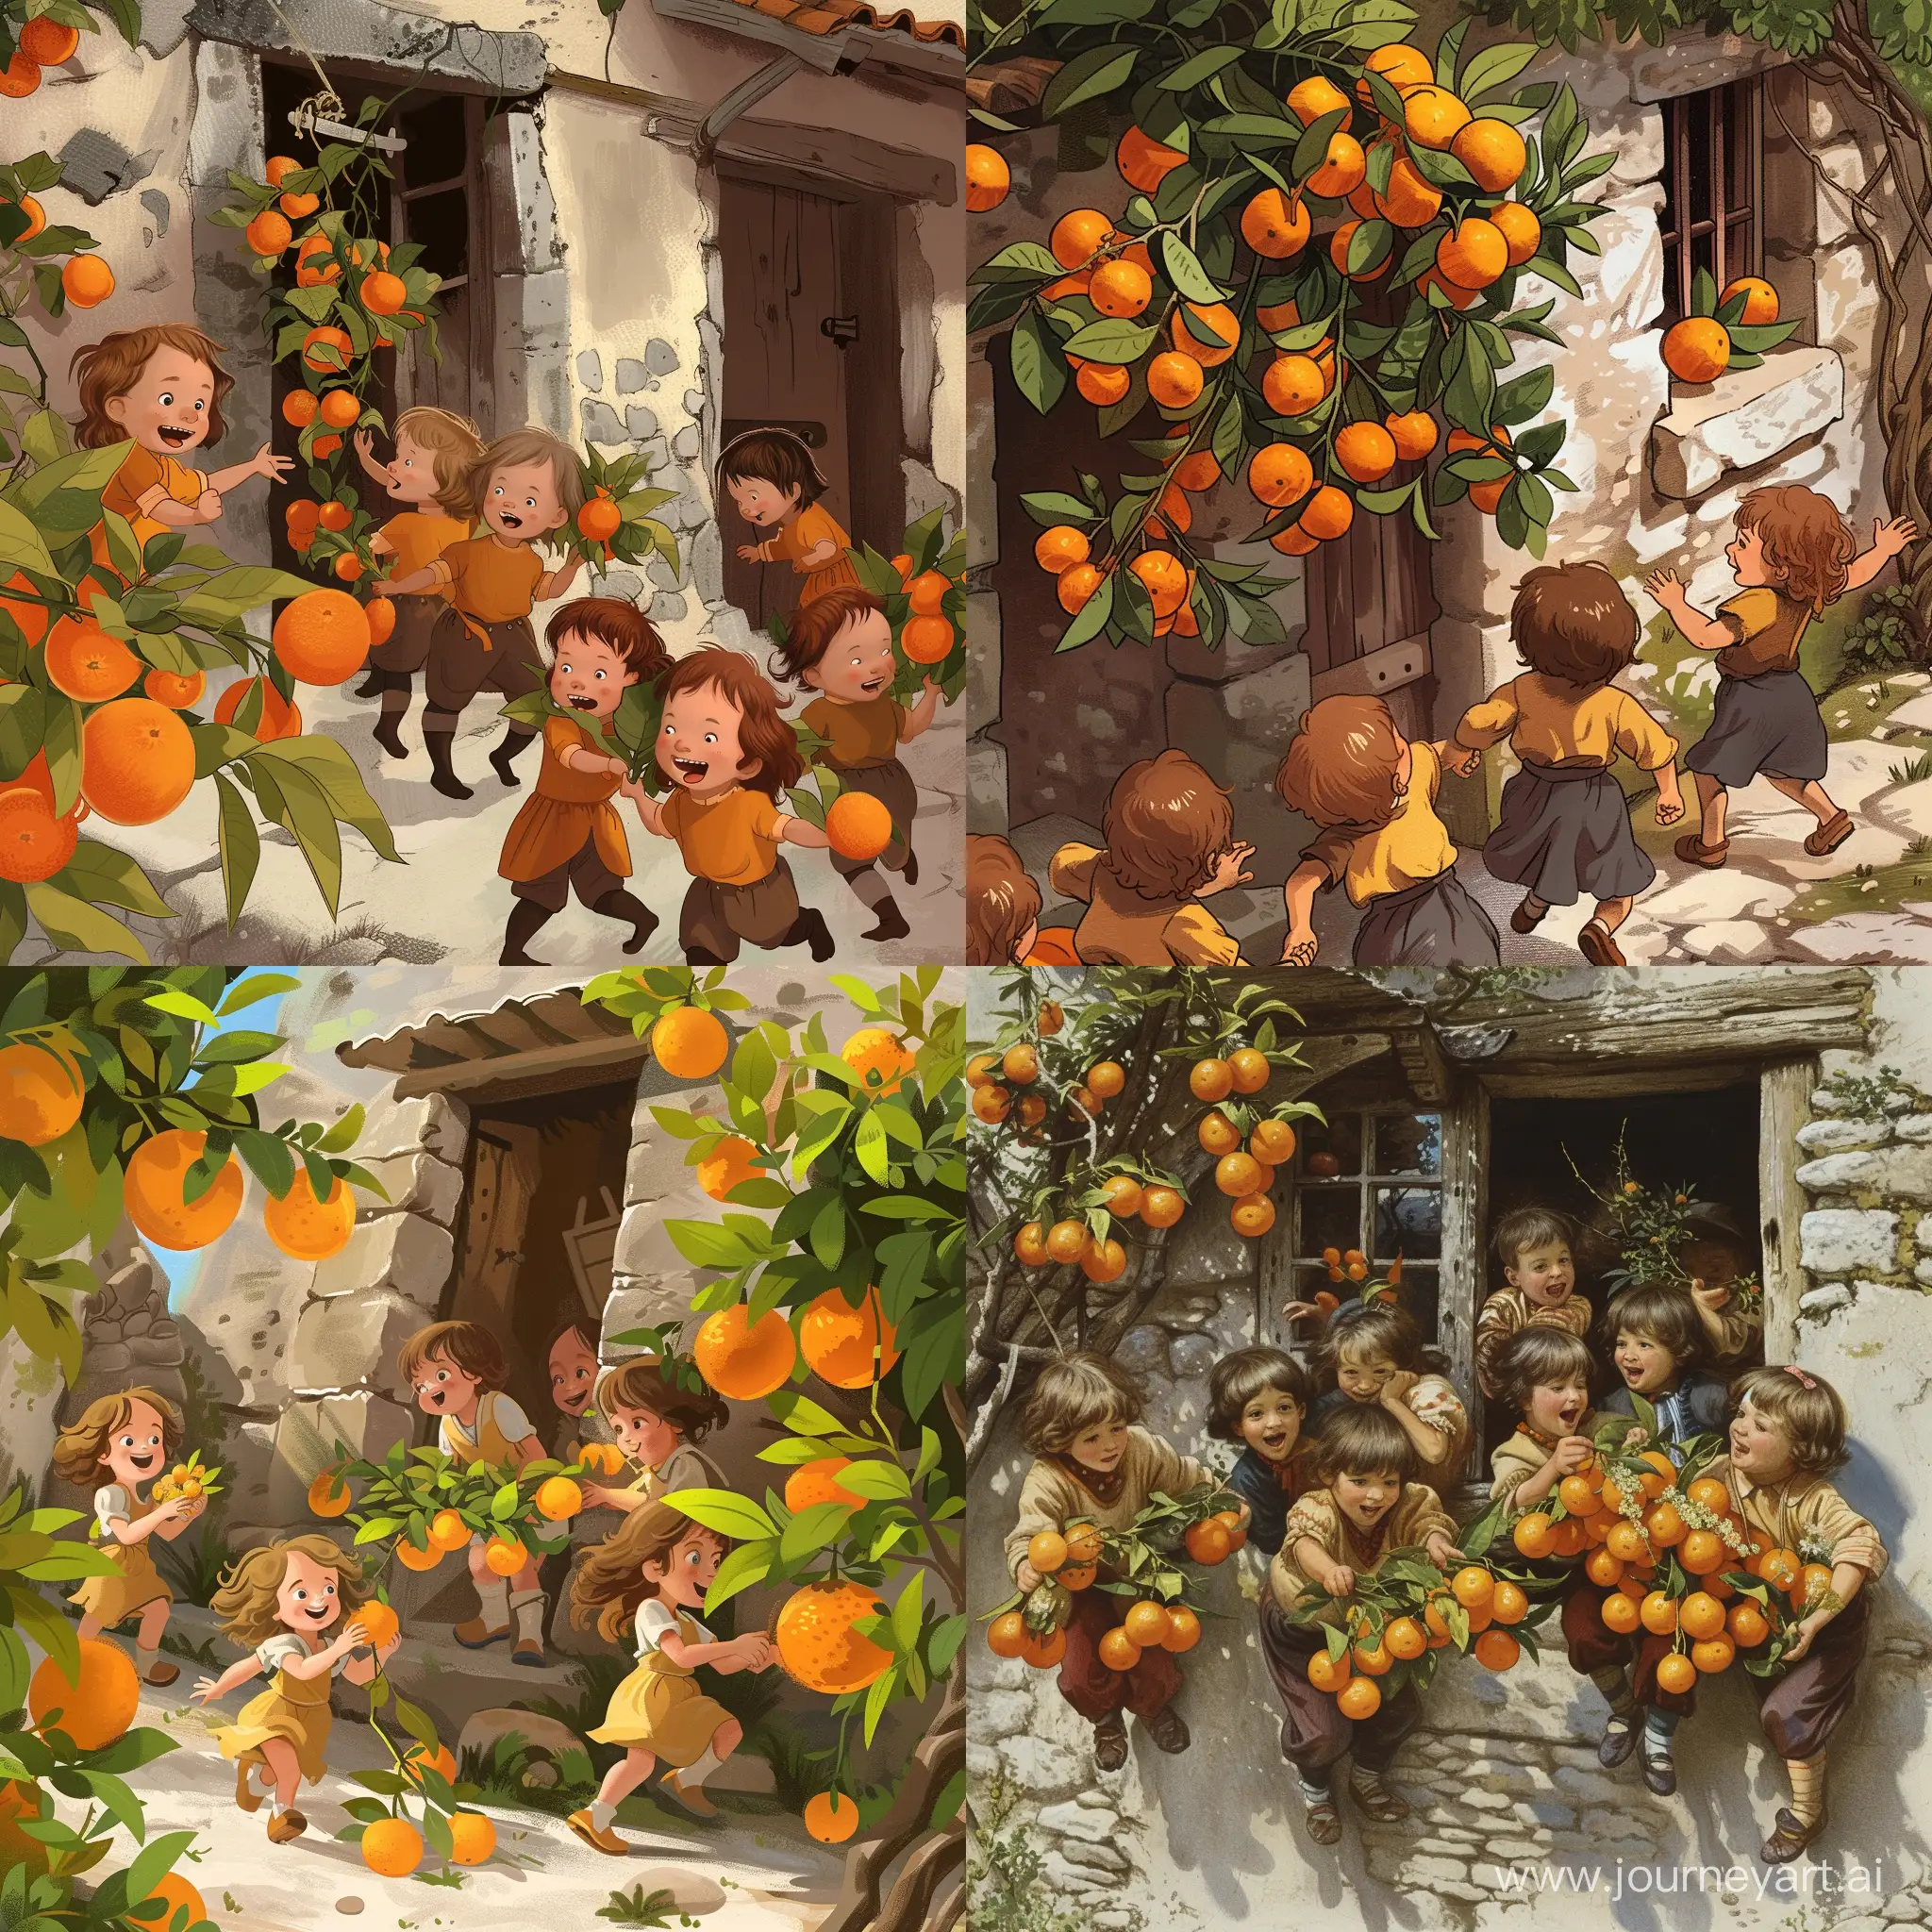 Brown, soft-eyed children ran out from the quaint stone hovels to offer nosegays, or bunches of oranges still on the bough, in cartoon style